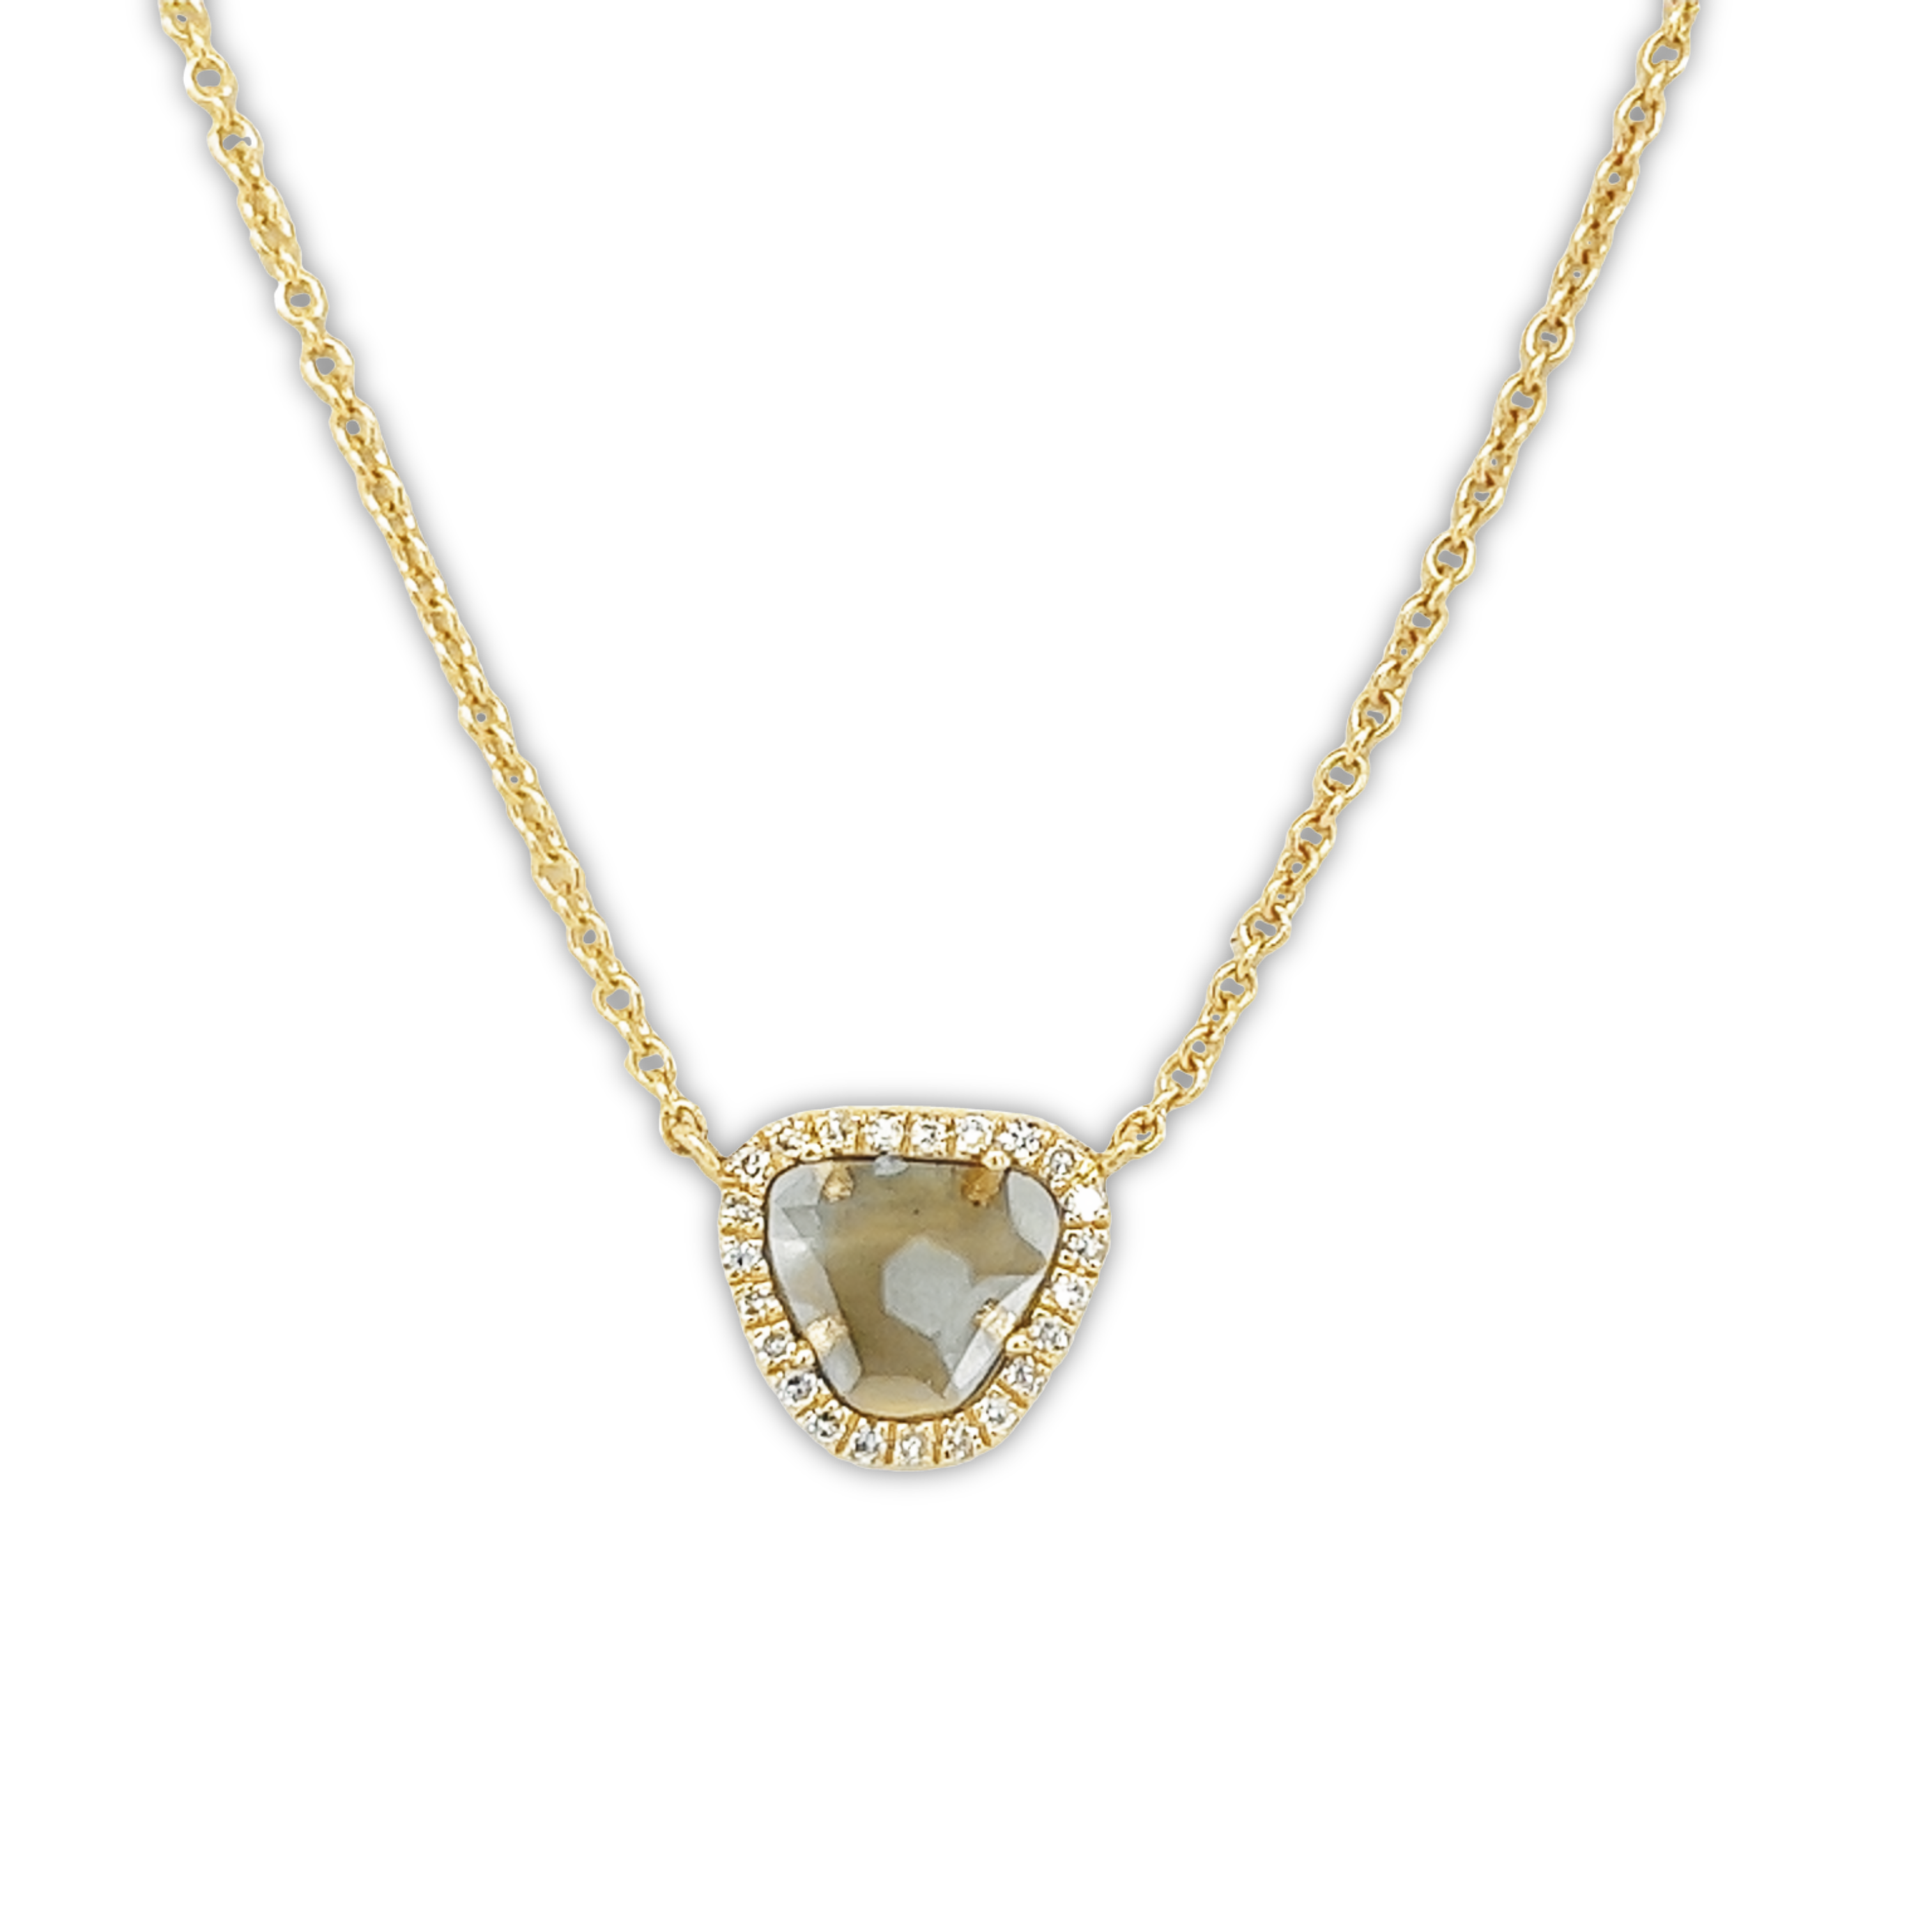 Featured image for “Champagne Diamond Single Slice Necklace”